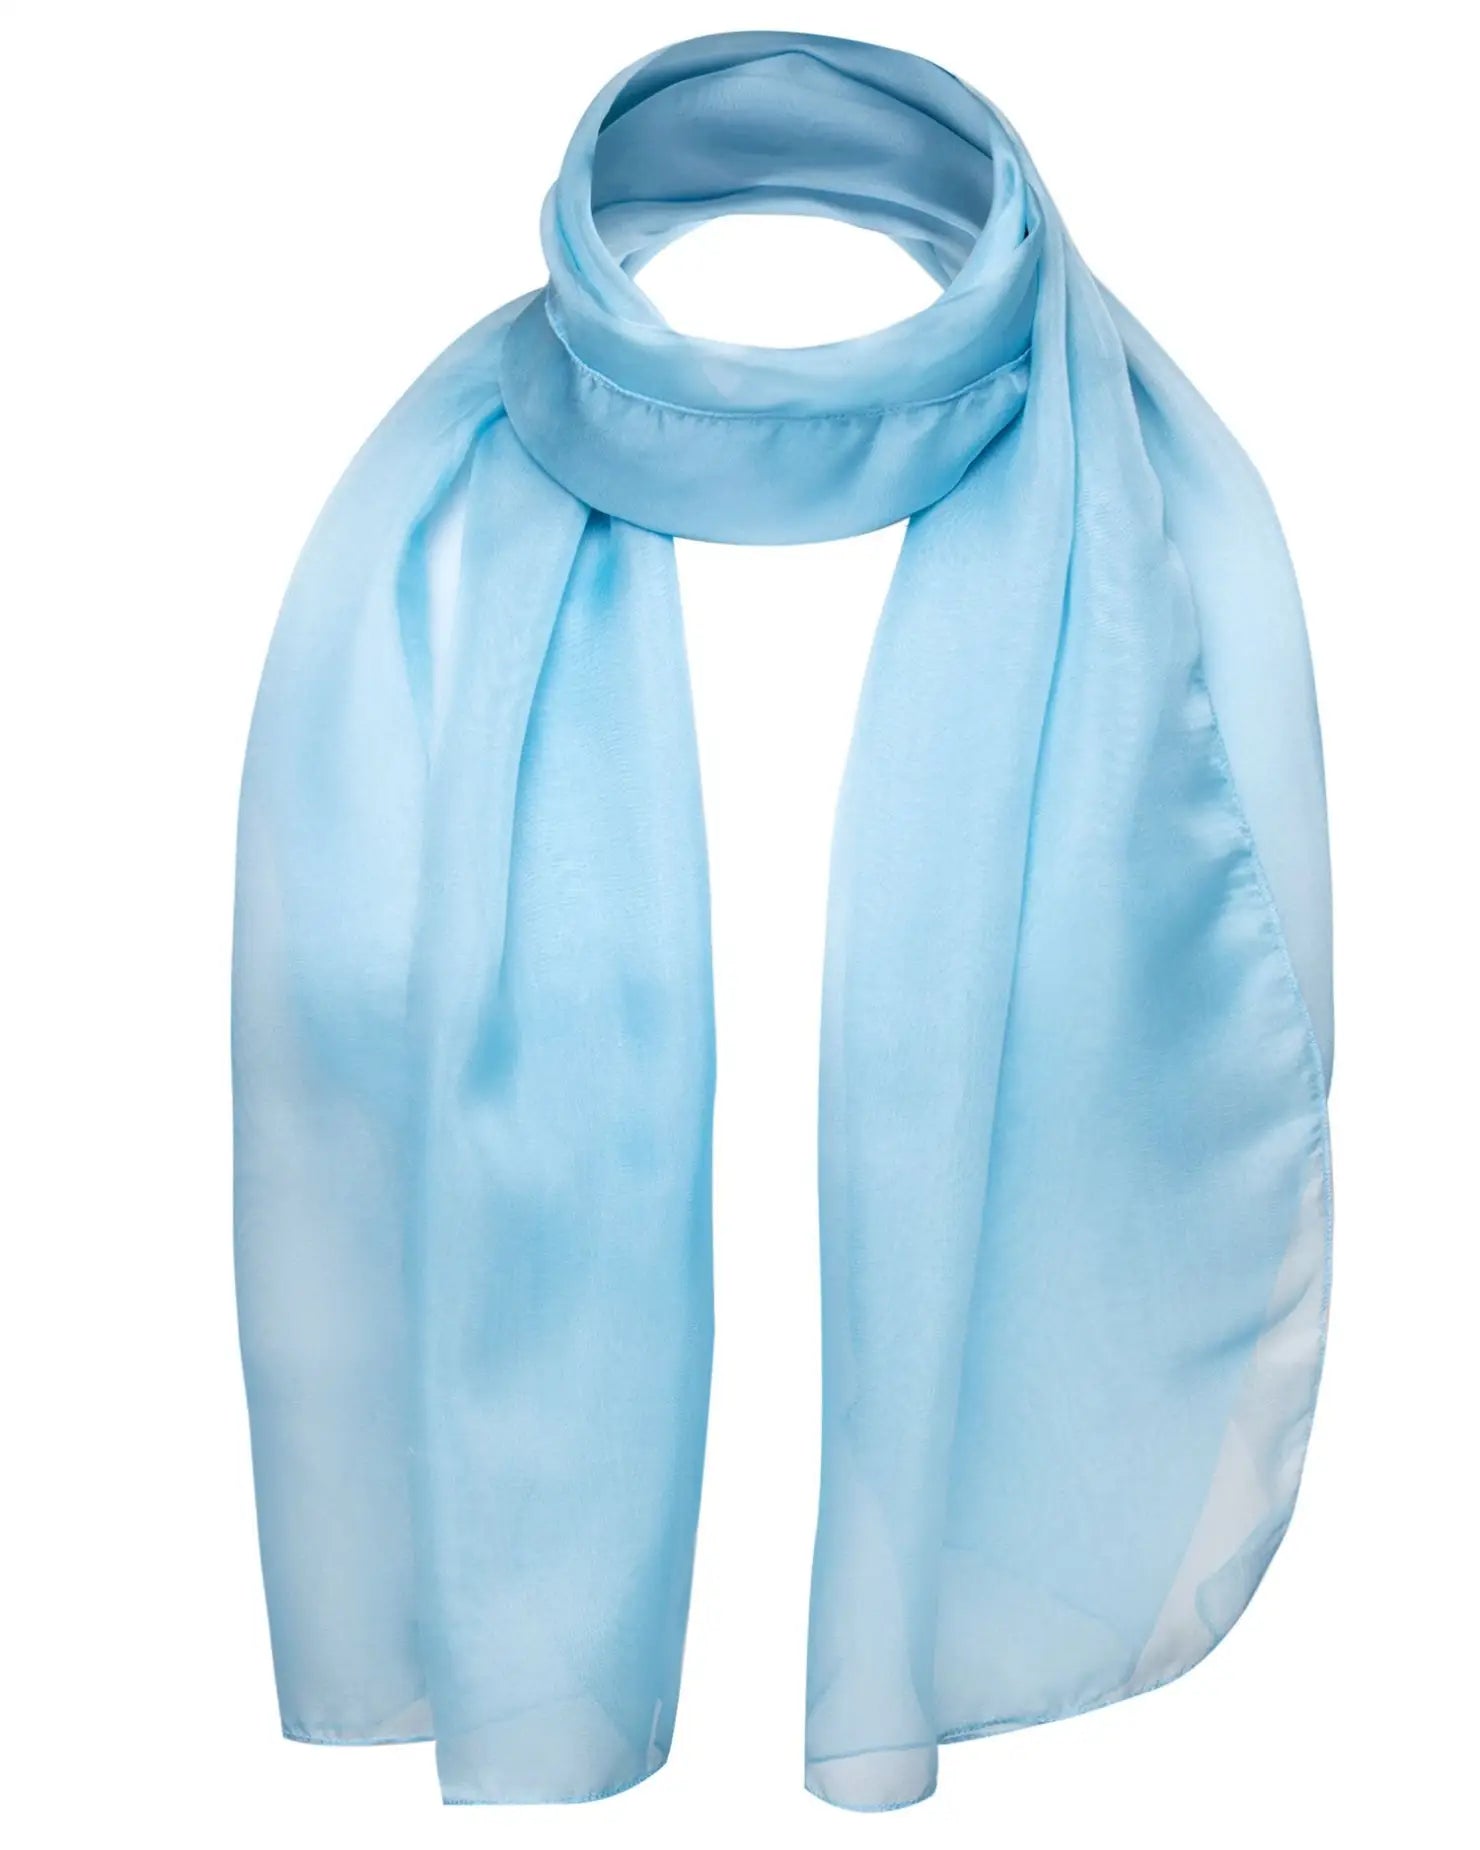 Classic plain chiffon scarf in light blue on white background